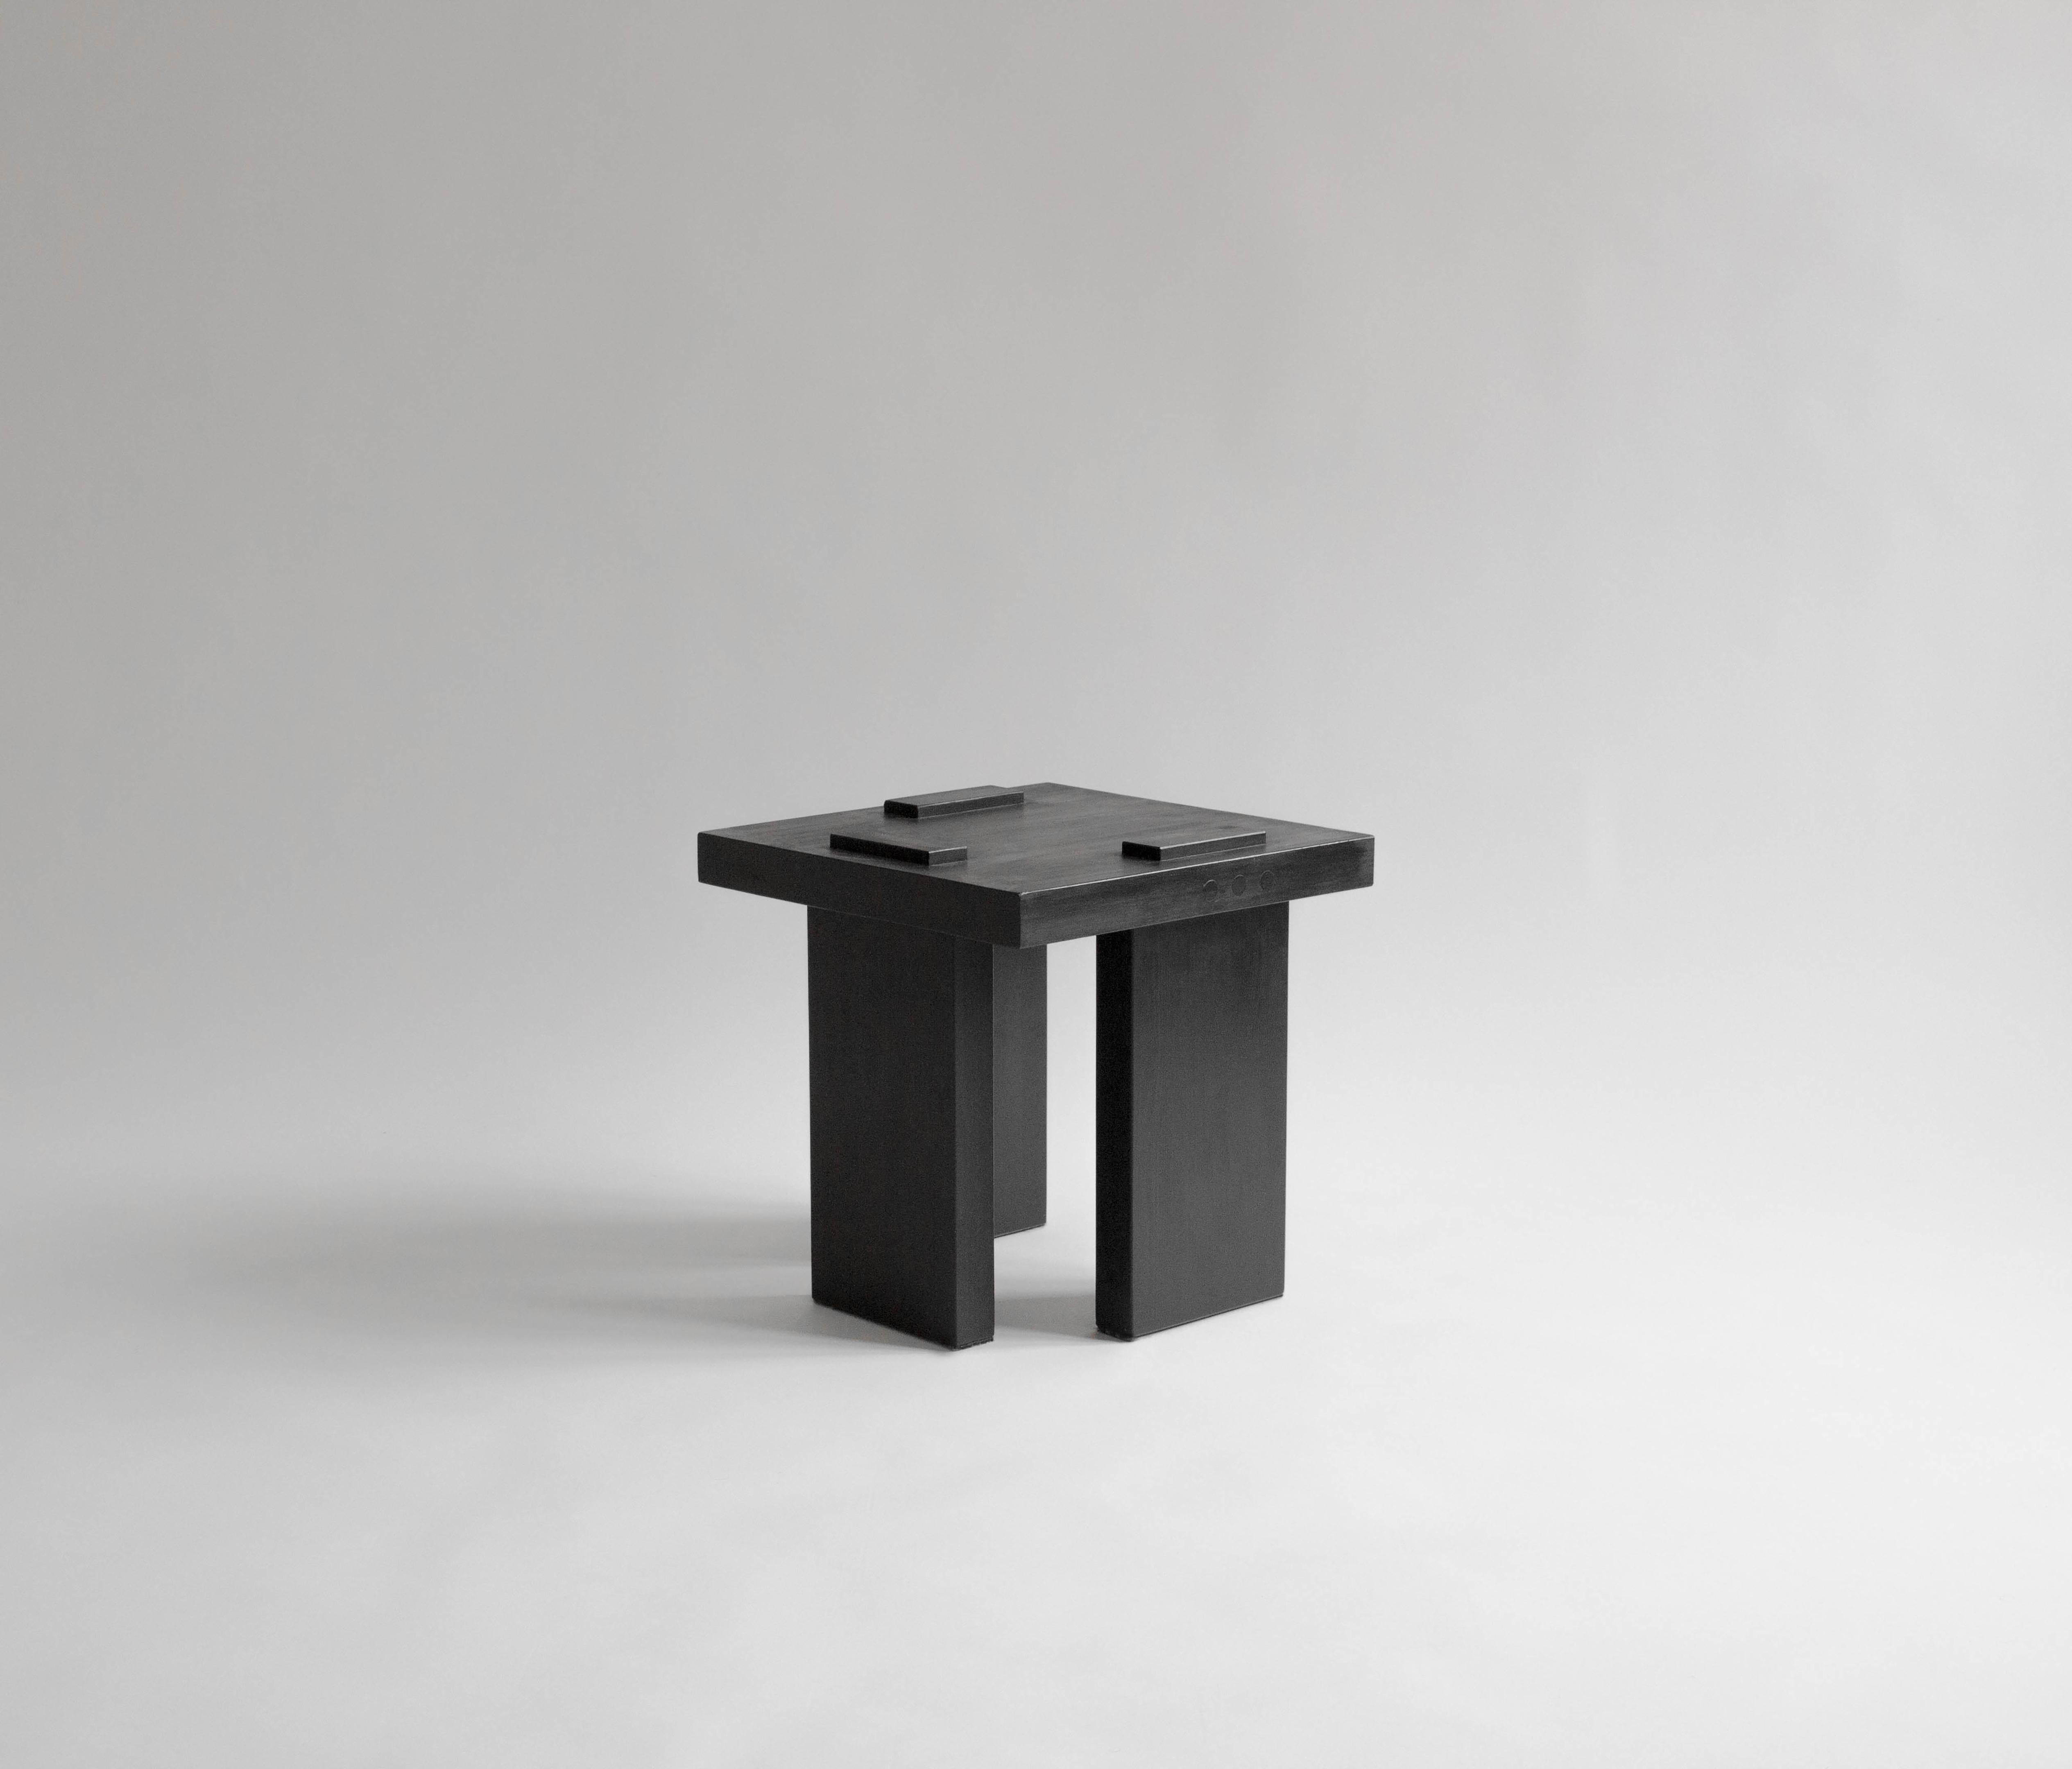 ItooRaba Stool by Sizar Alexis
Signed
Dimensions: length 40 x width 40 x height 38cm
 seat height: 42cm

Comes in stained black, white and natural pine

A furniture series that embraces geometrical shapes. Inspired by the passion for Brutalism, by